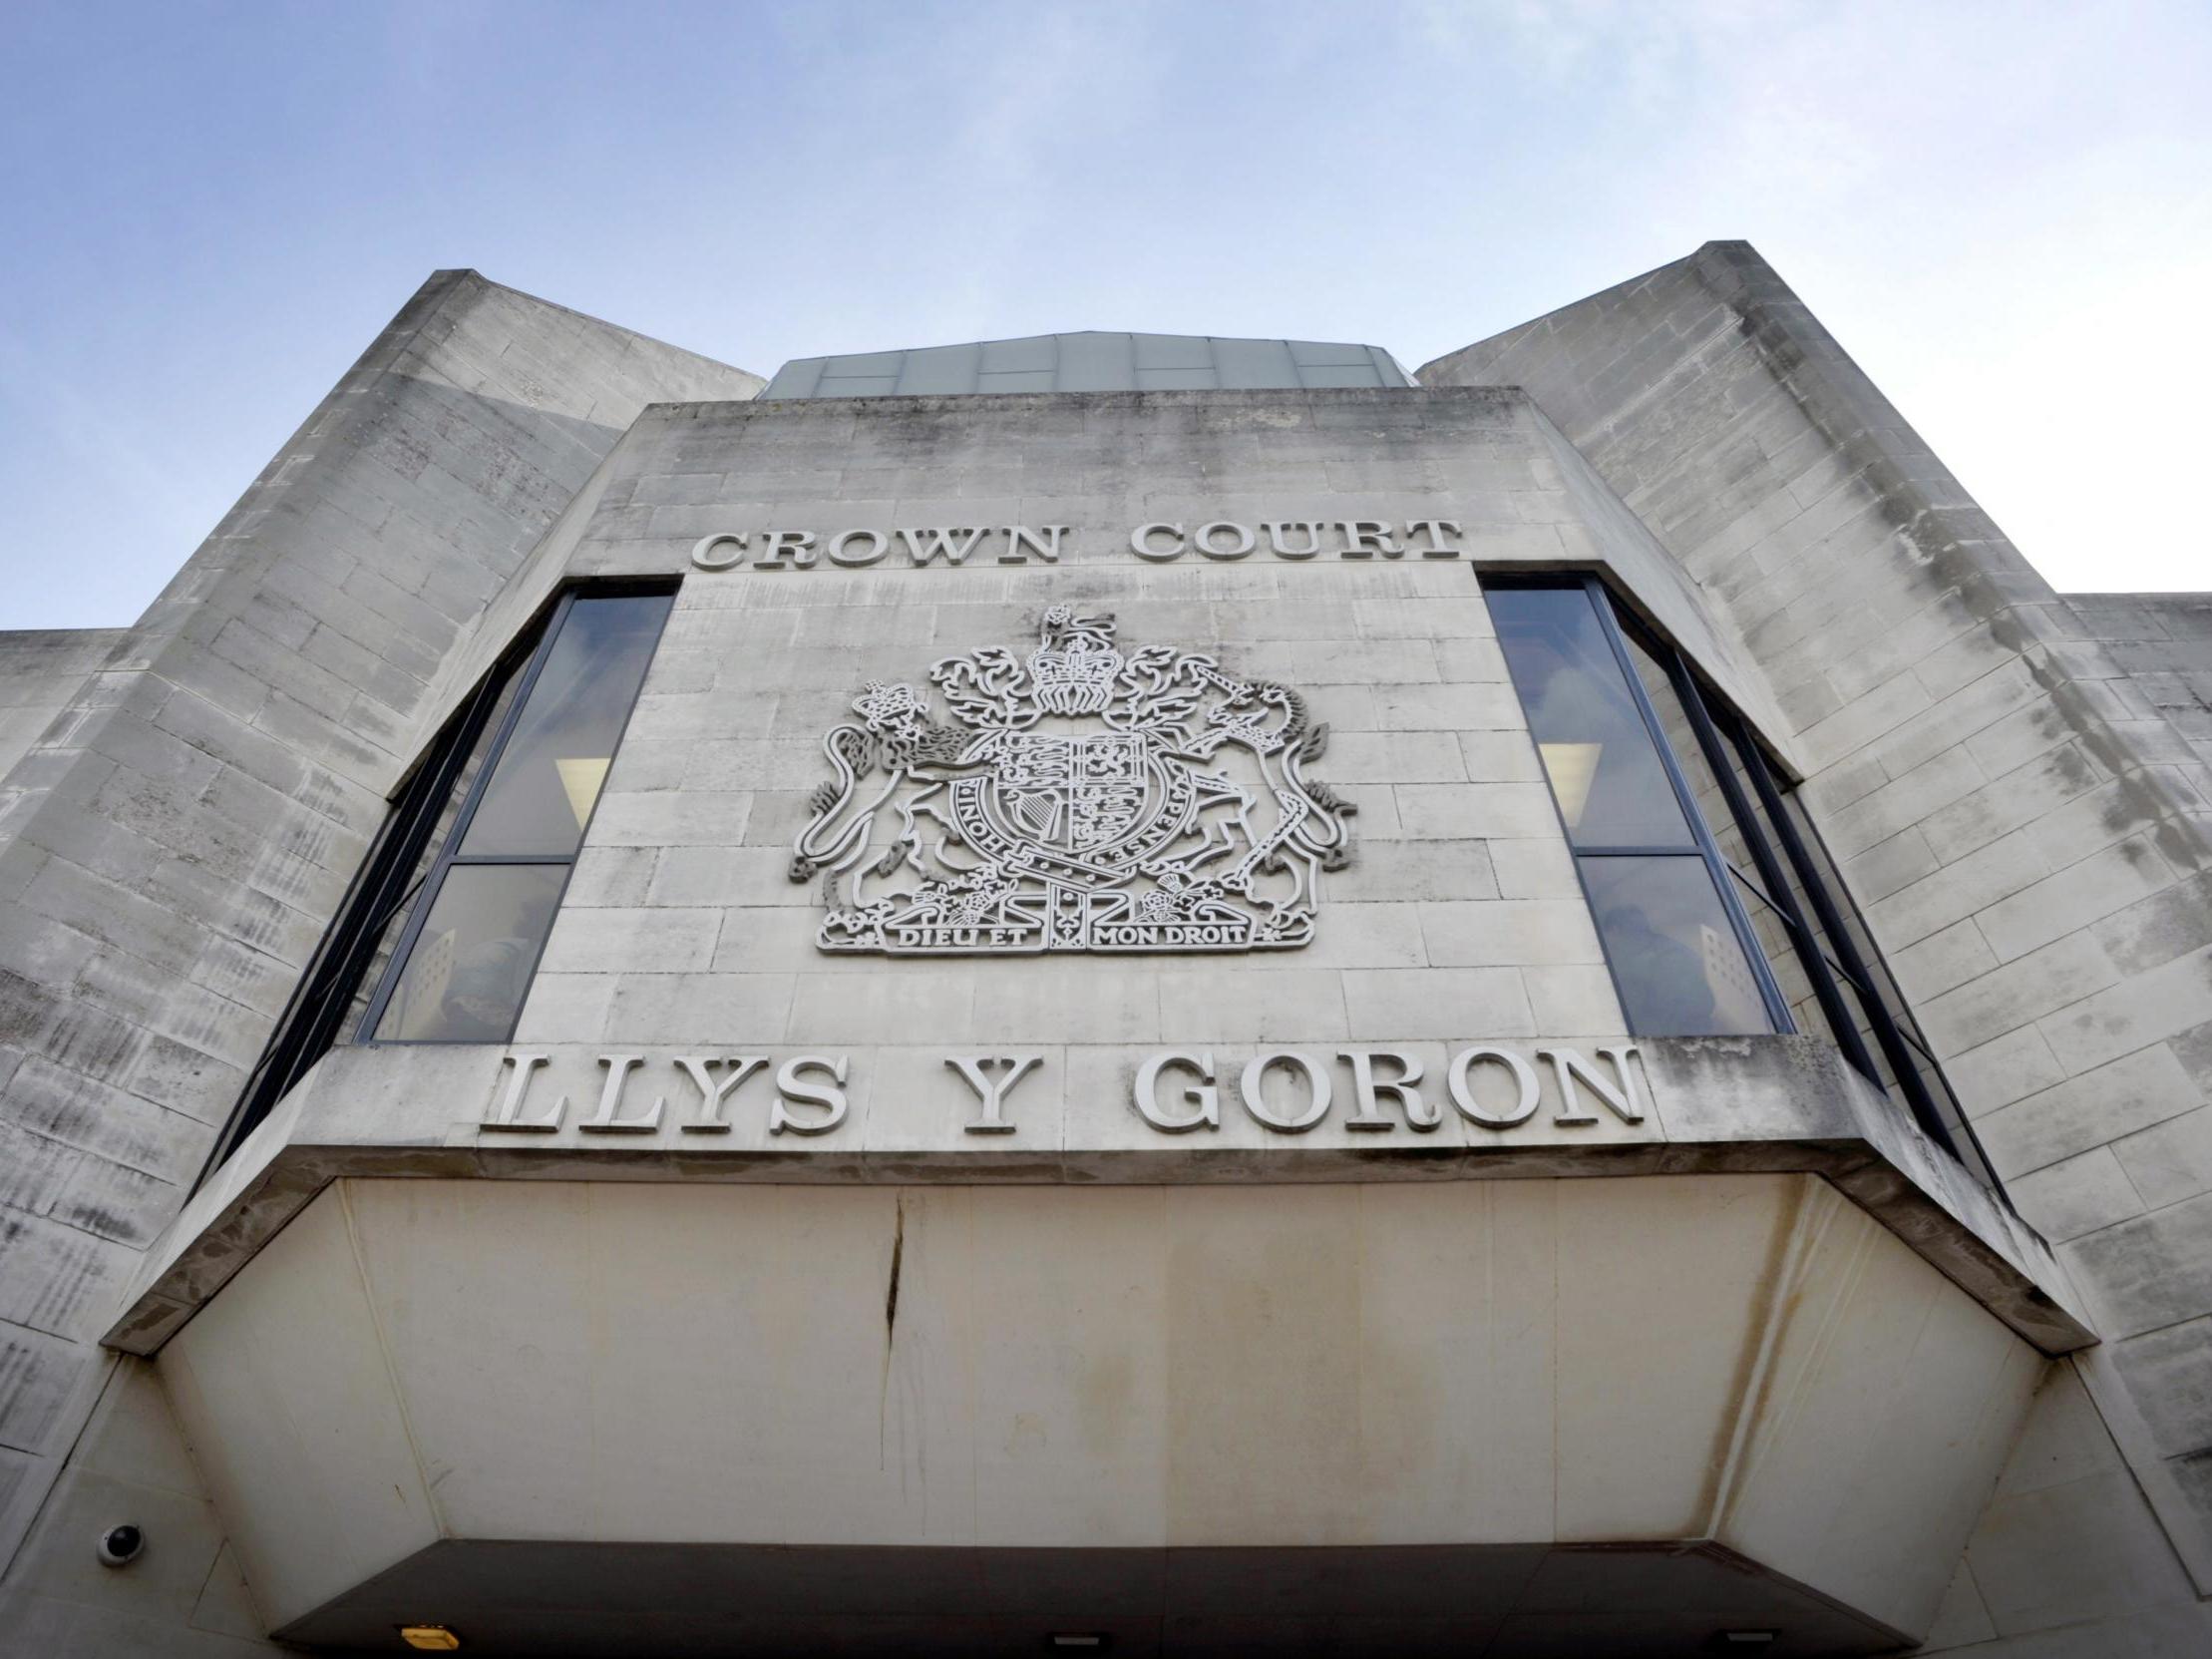 The hearing took place at Swansea Crown Court